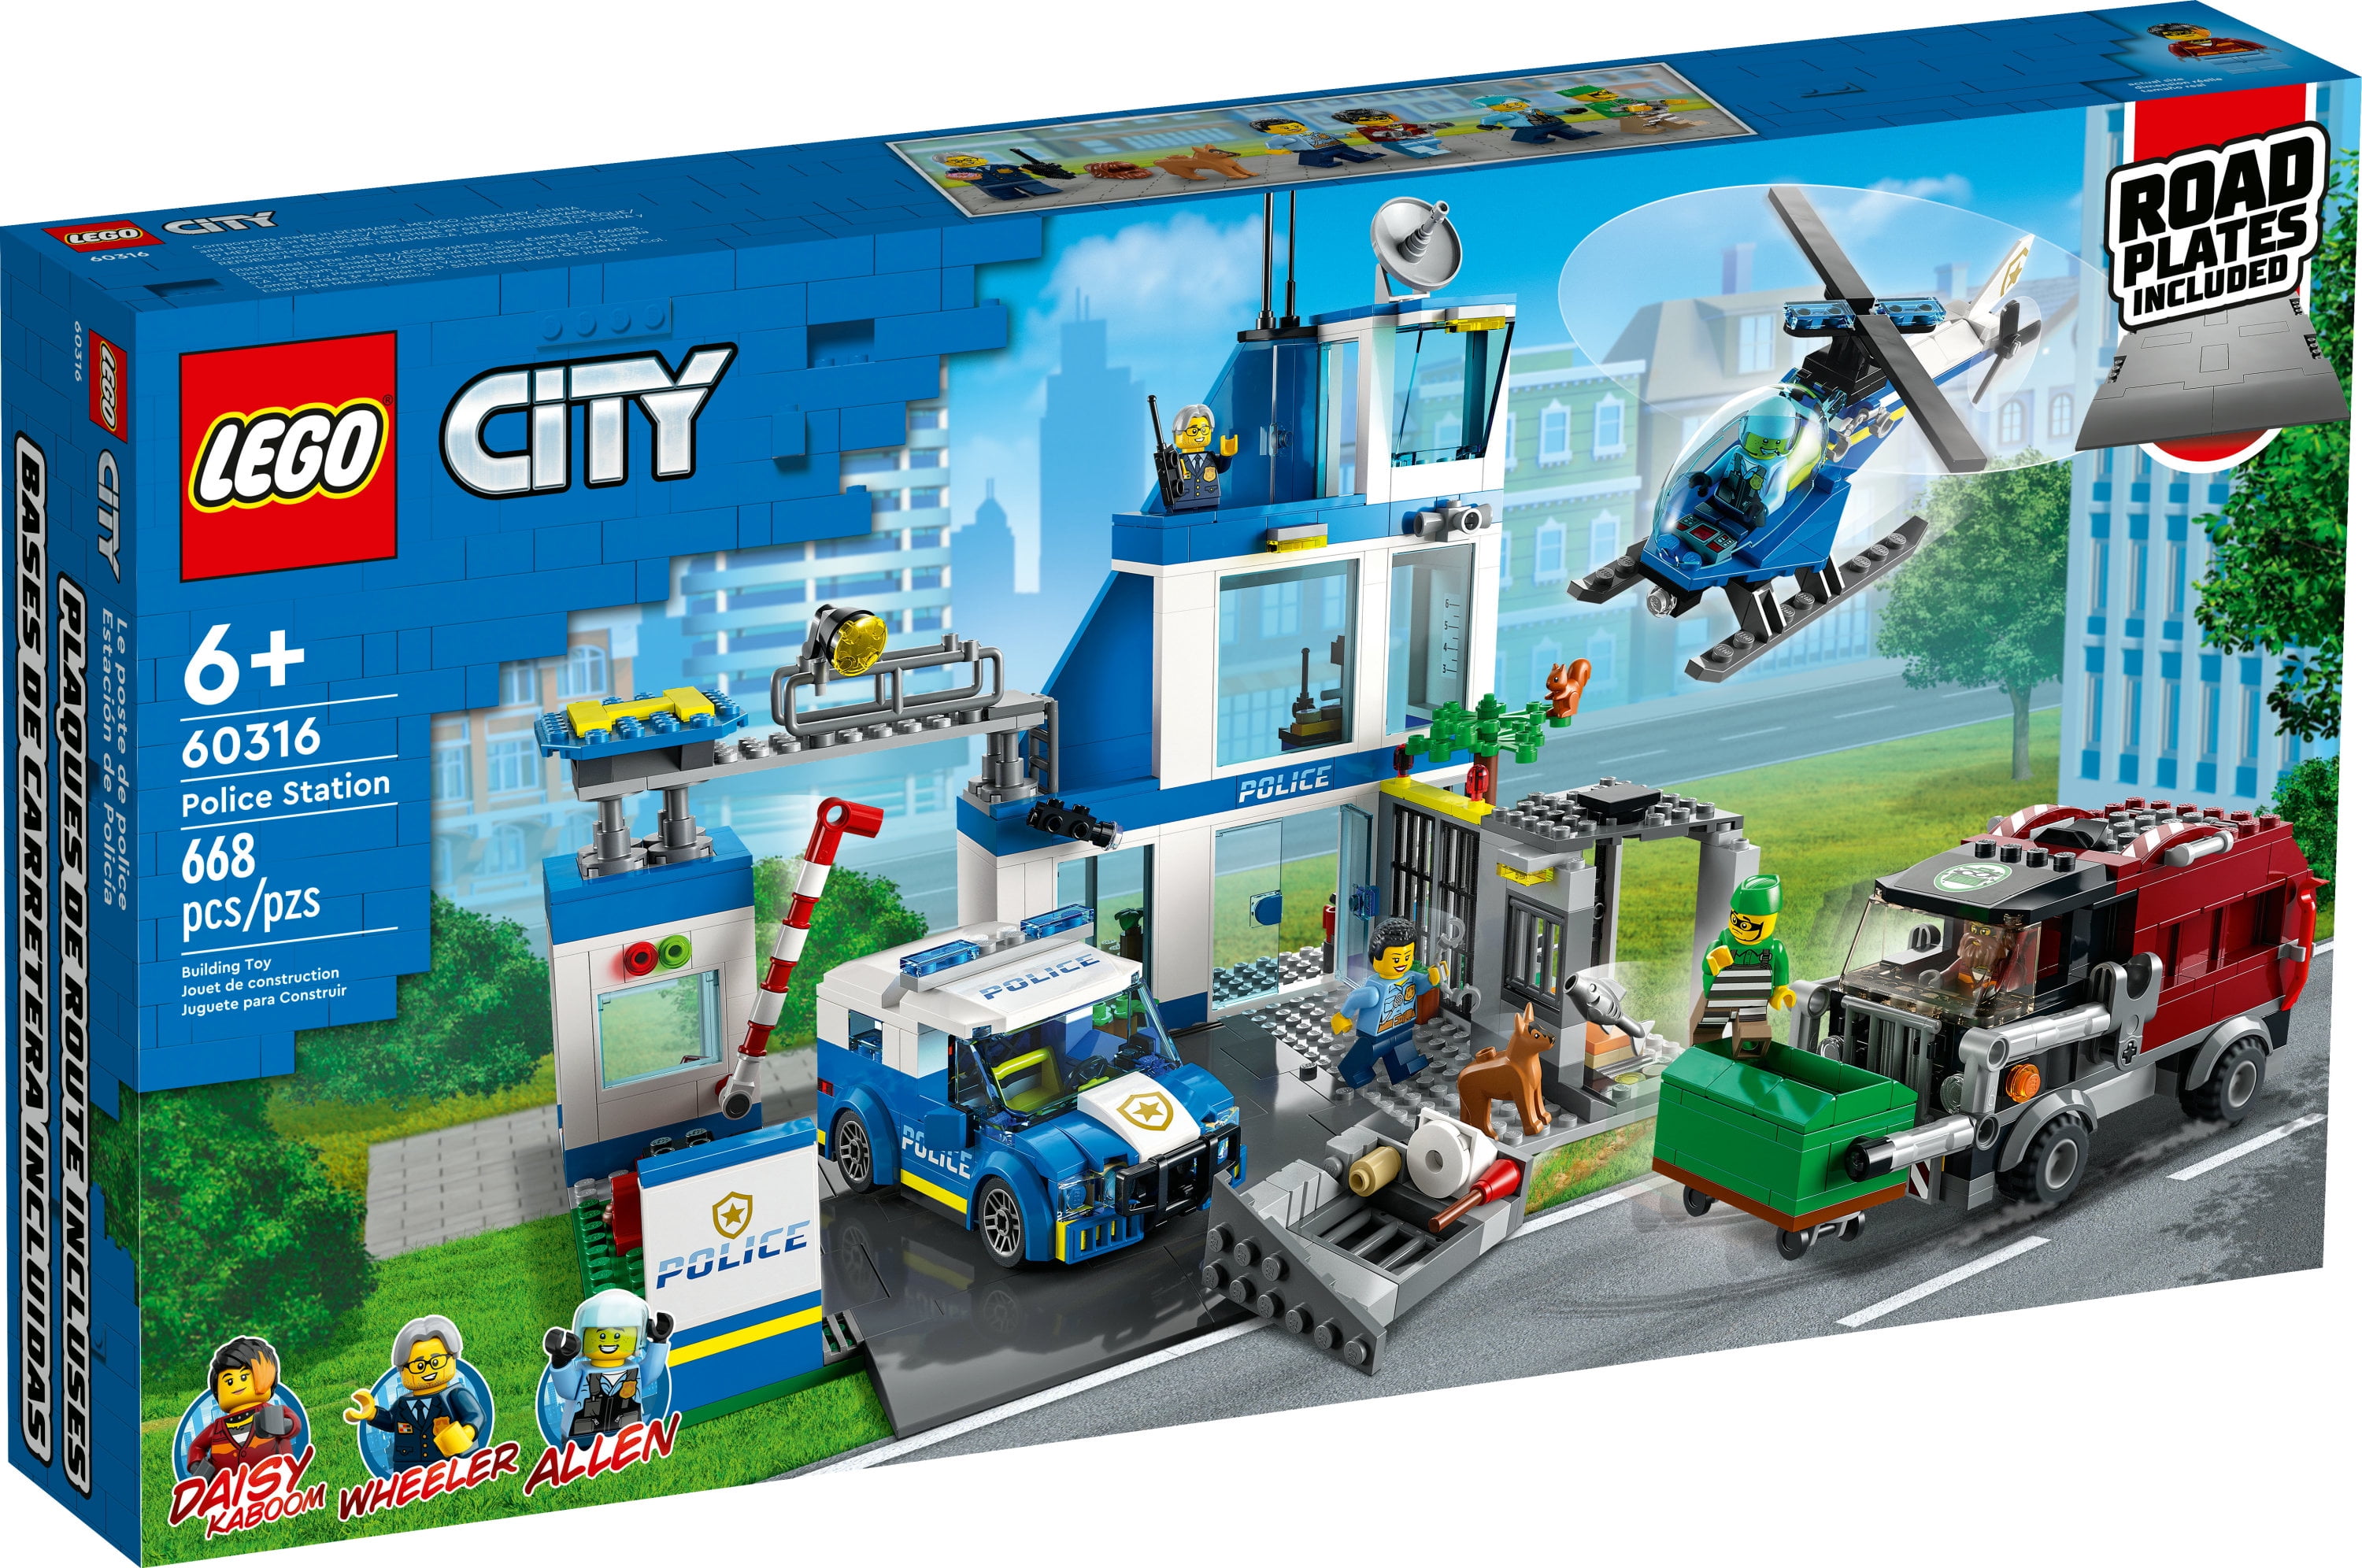 LEGO City Police Station with Van, Garbage Truck & Helicopter Toy 60316, Gifts for 6 Plus Year Old Kids, Boys & Girls with 5 Minifigures and Toy - Walmart.com